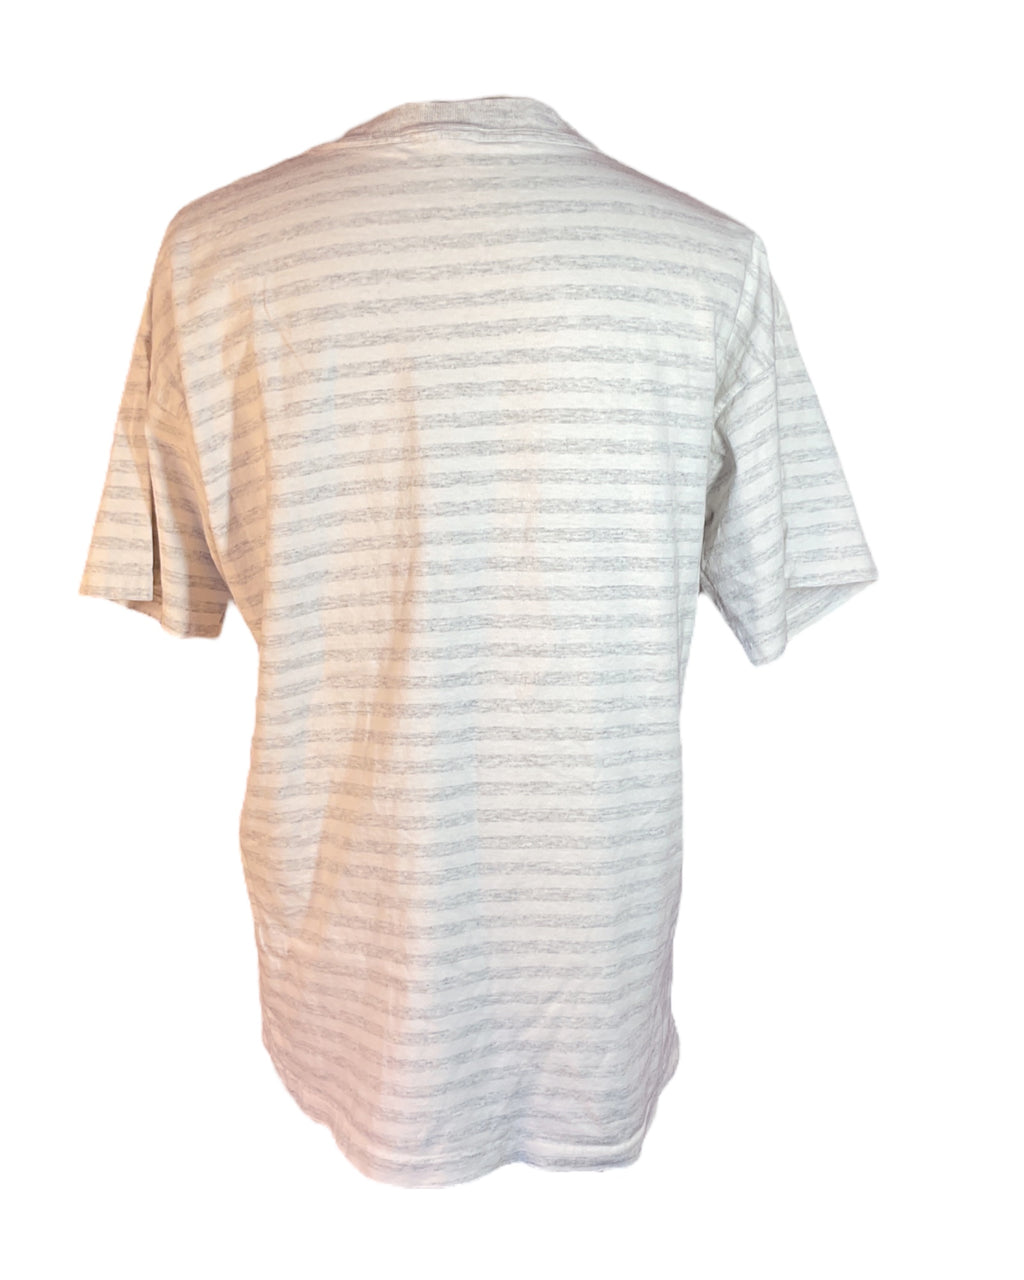 Gray Striped "Tennessee" Graphic Tee, M